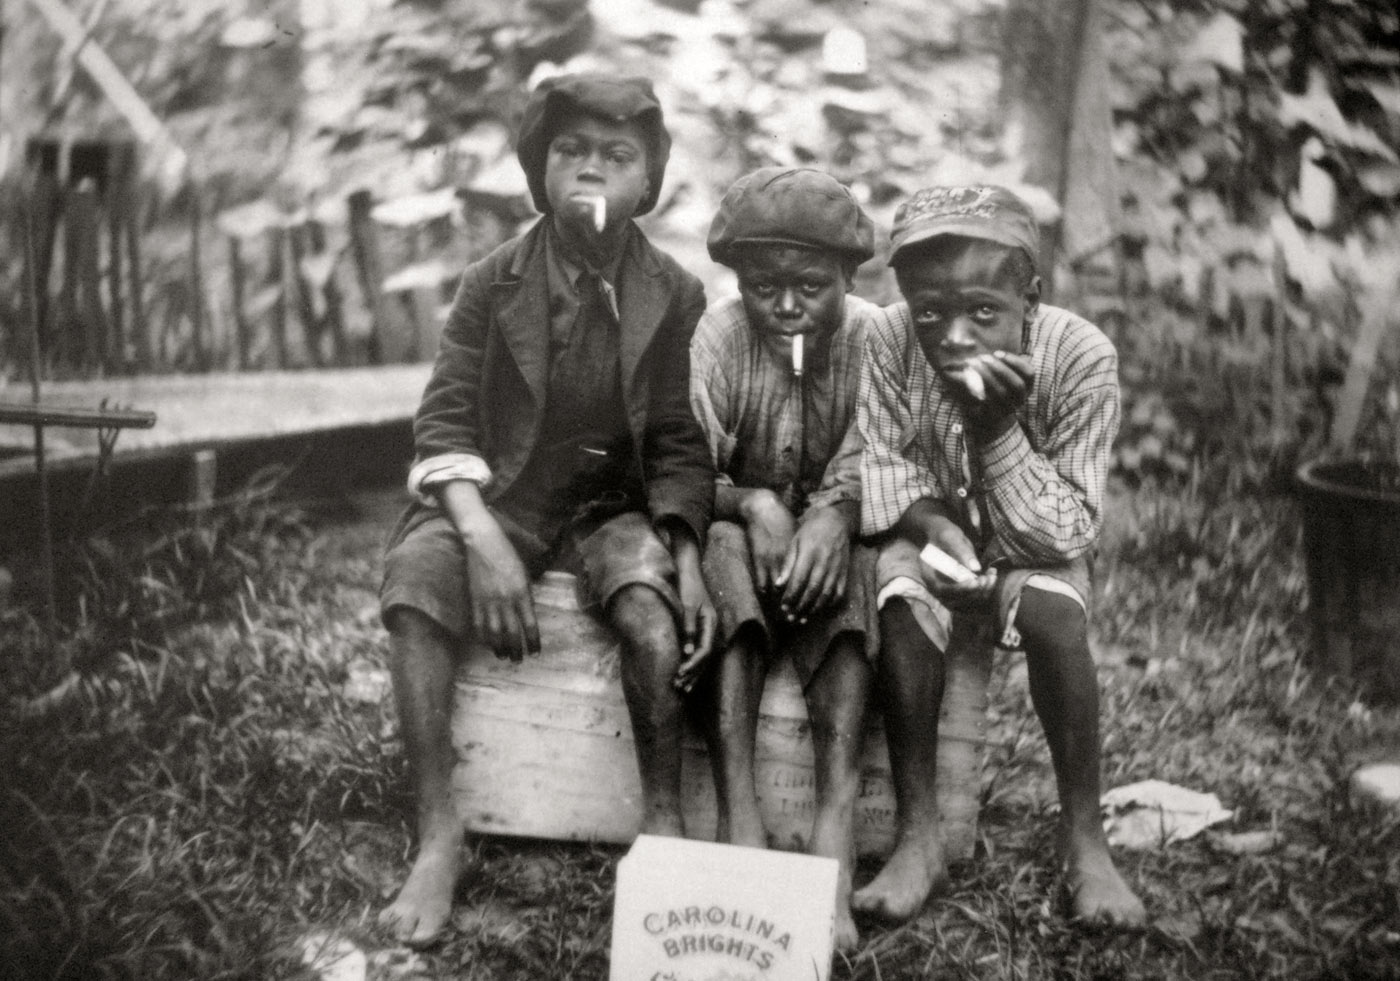 Not much known - inherited from an Uncle who lived in New Orleans. Original image. View full size.